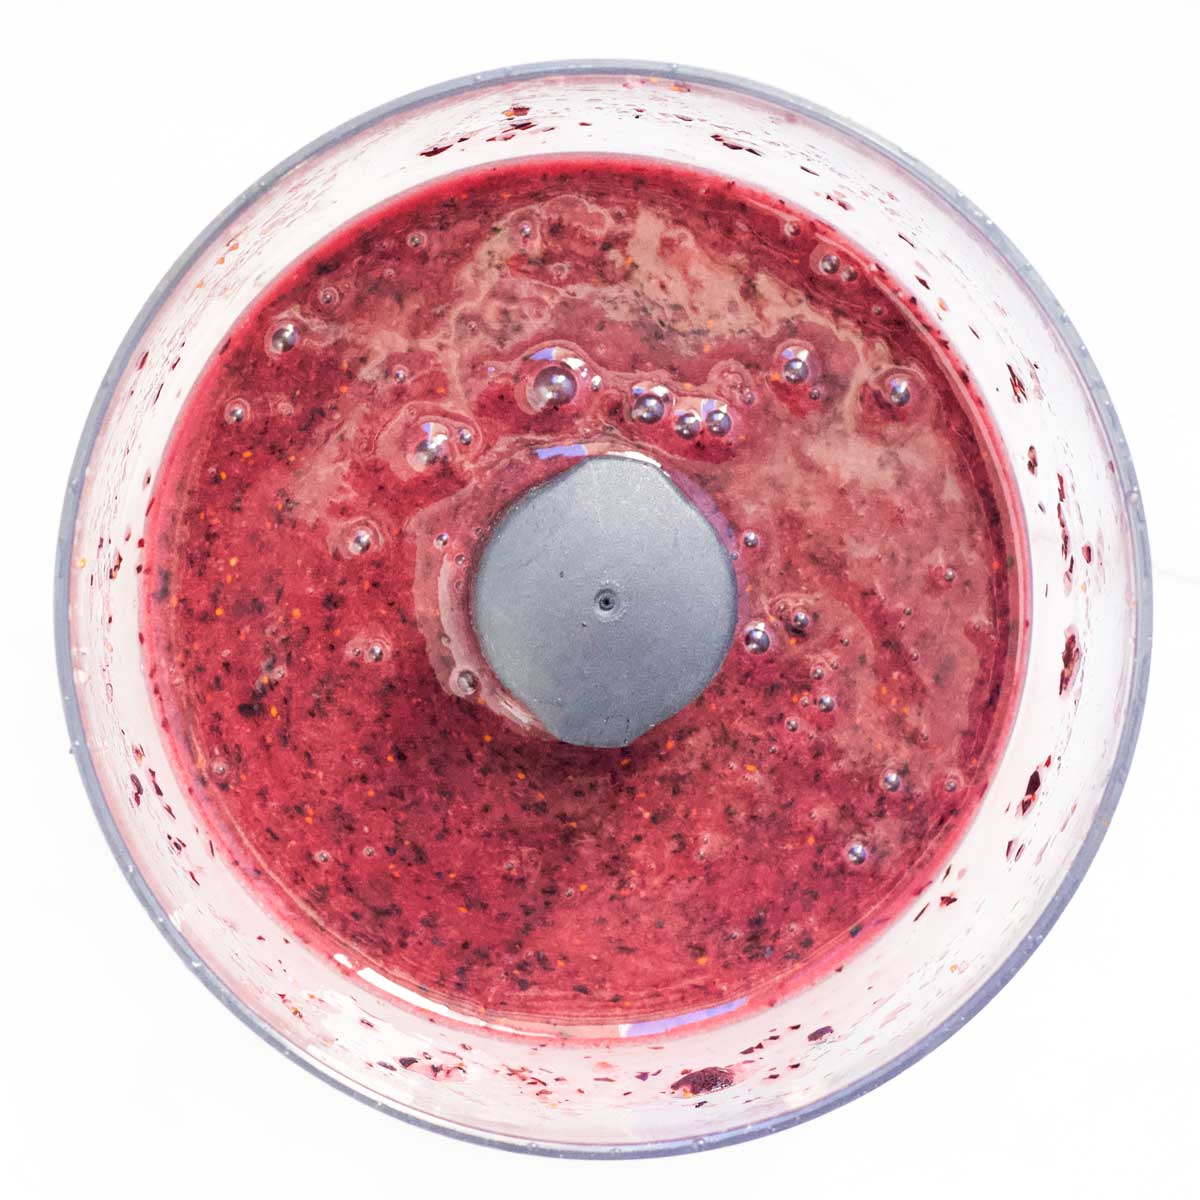 Blueberry Puree in Food Processor Bowl